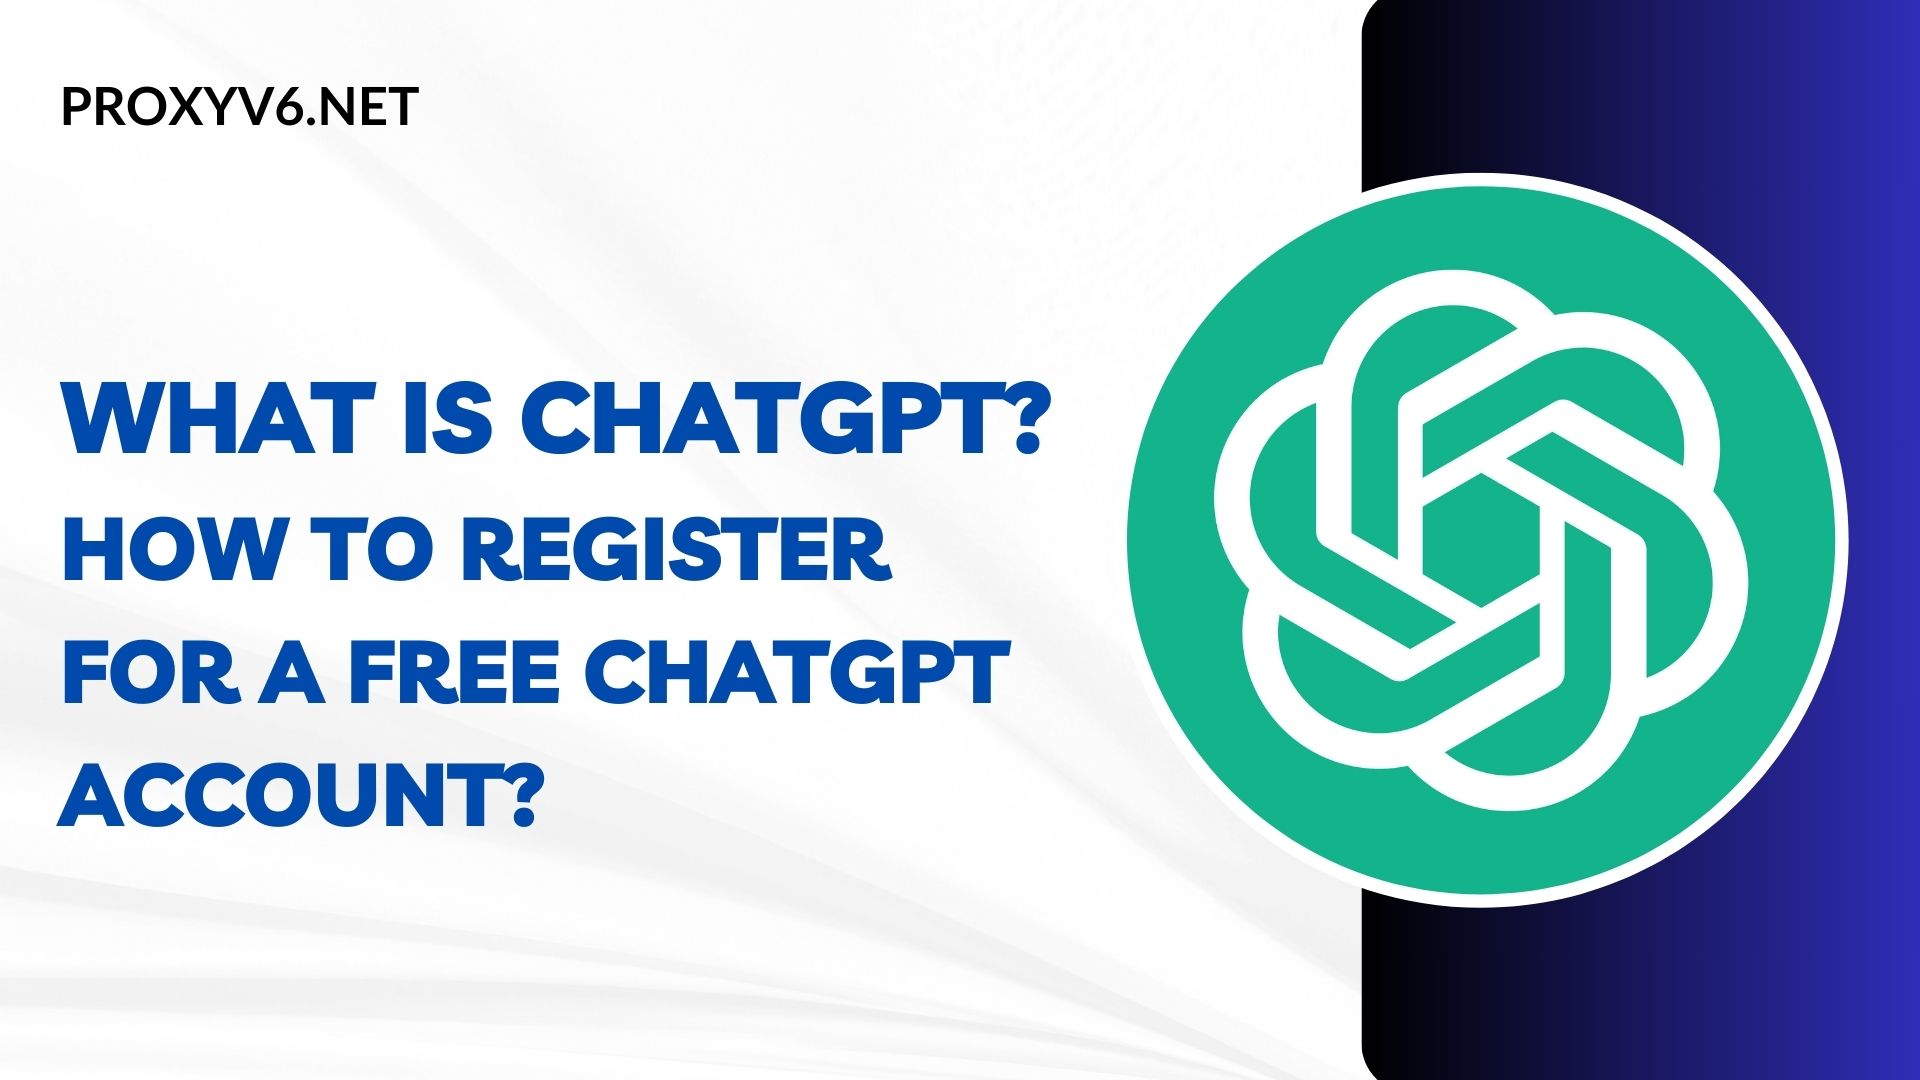 What is ChatGPT? How to register for a free ChatGPT account